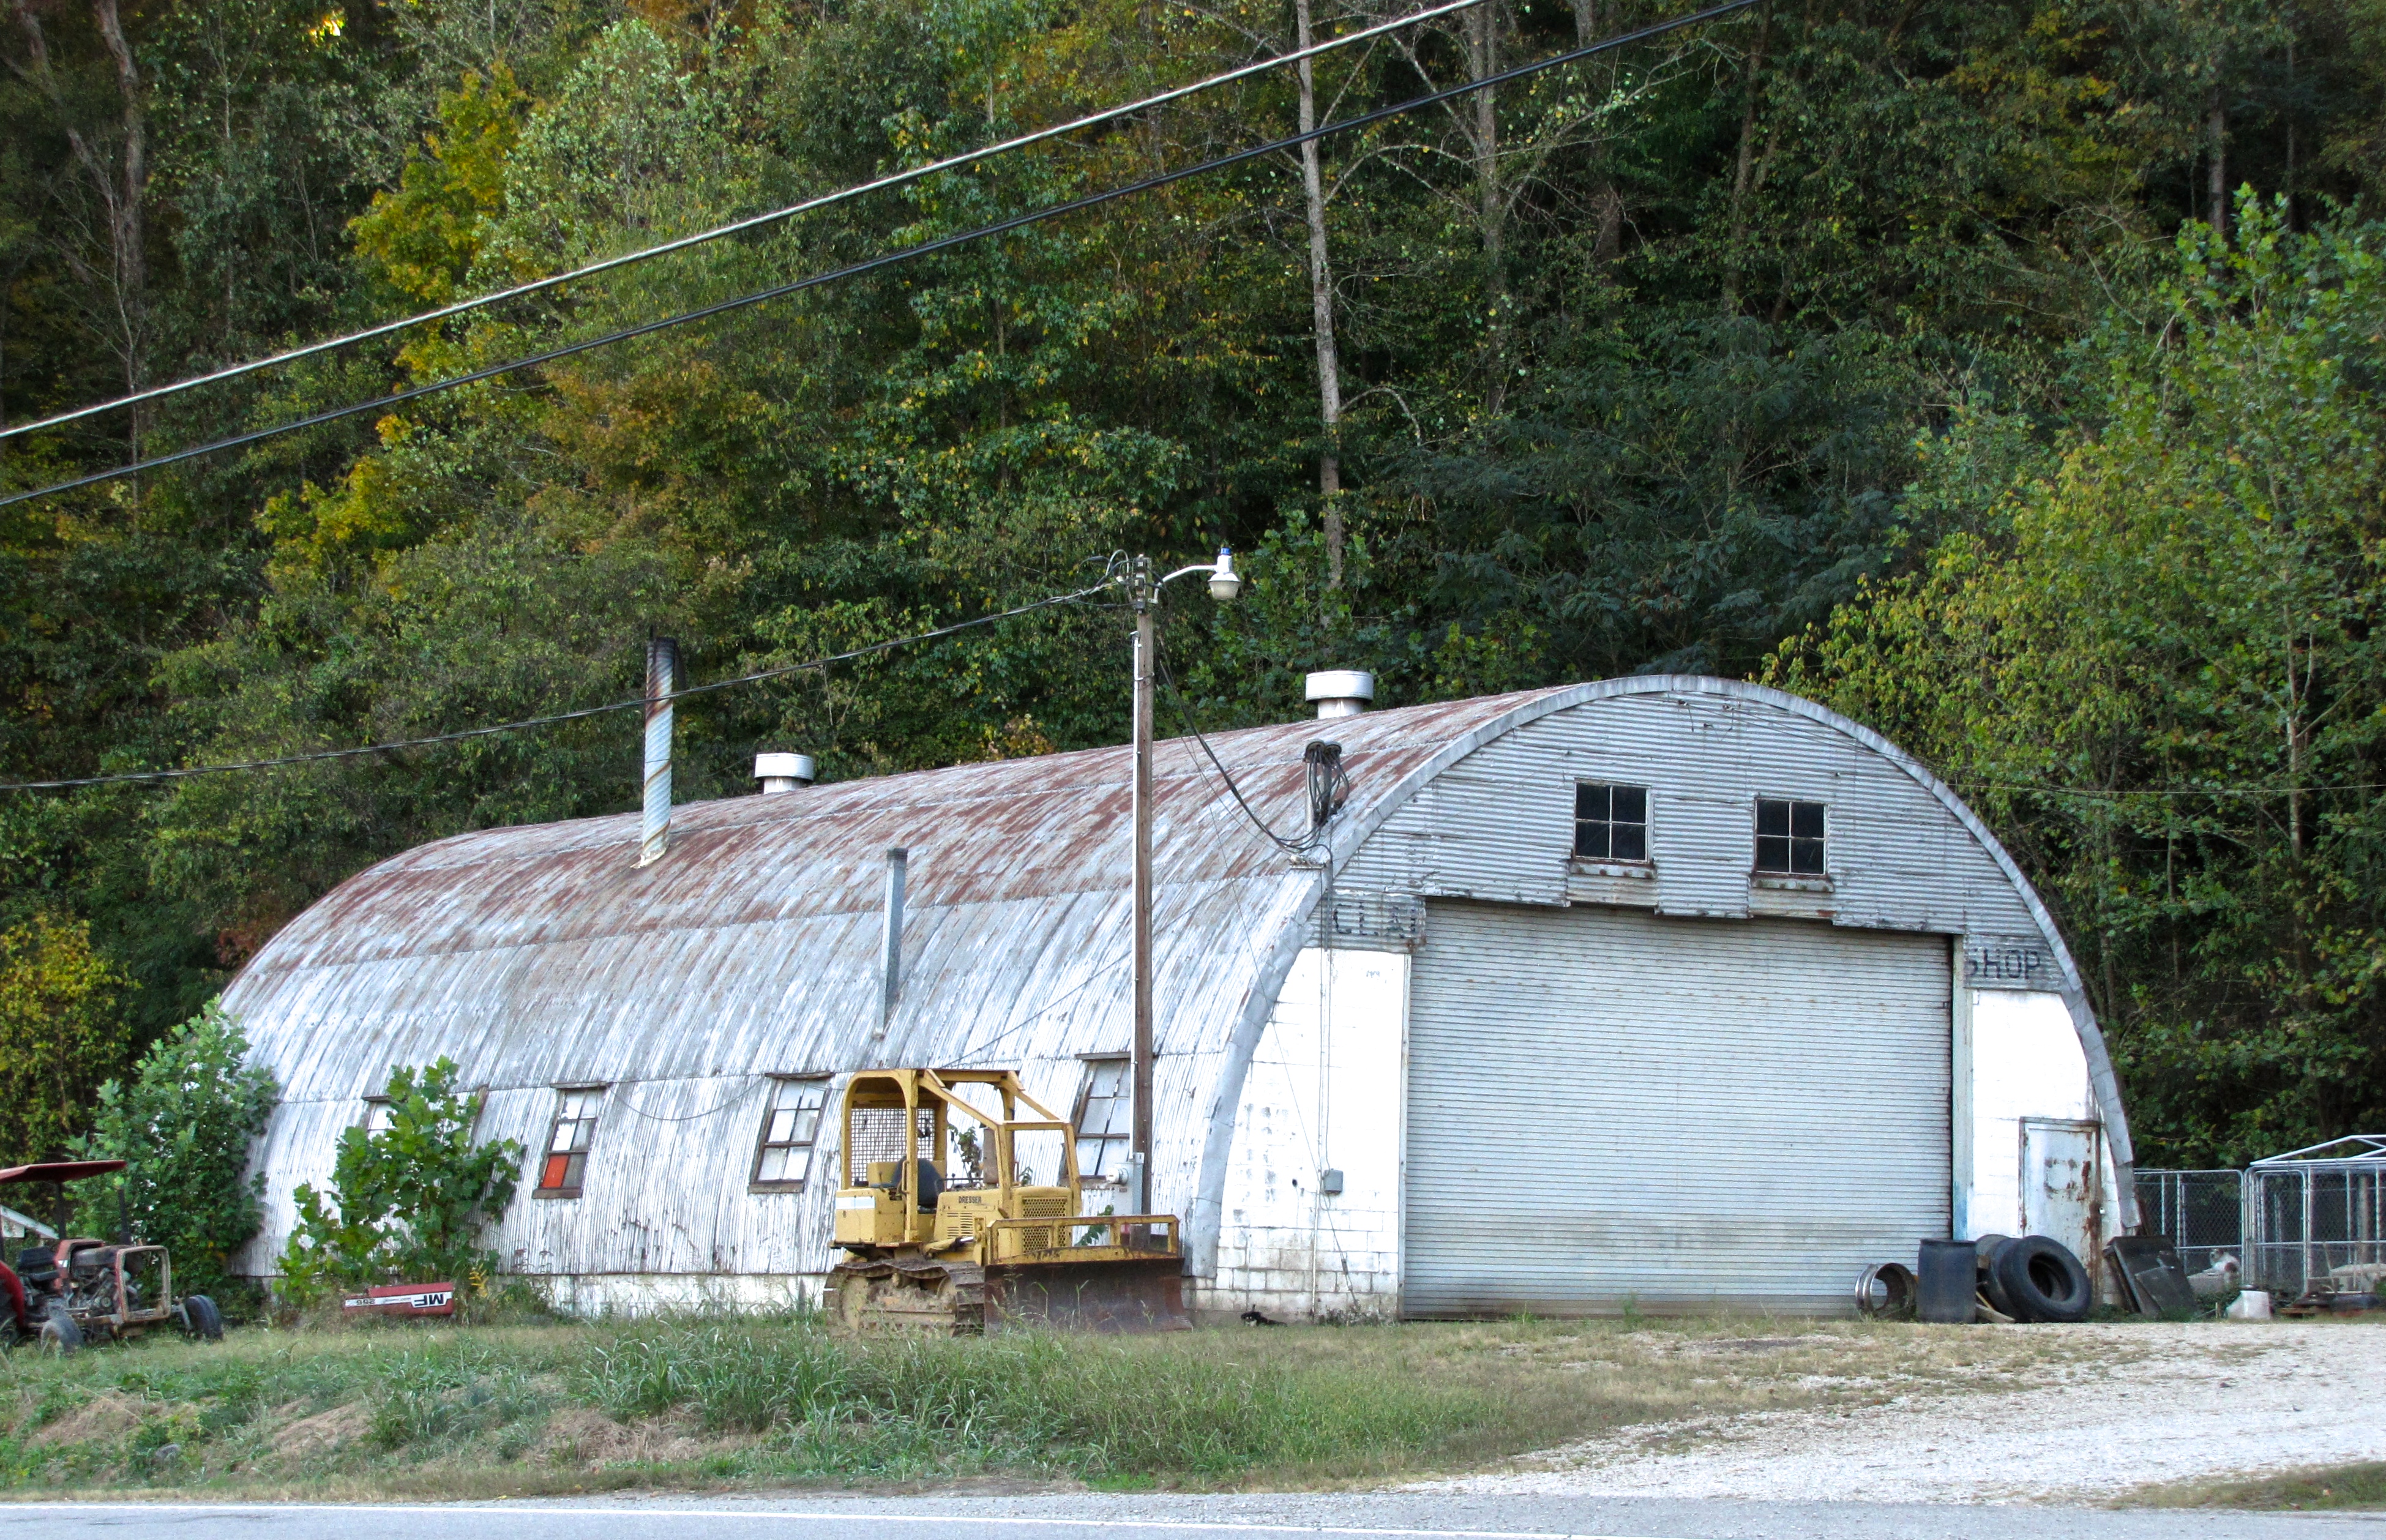 quonset hut in Goffstown, NH